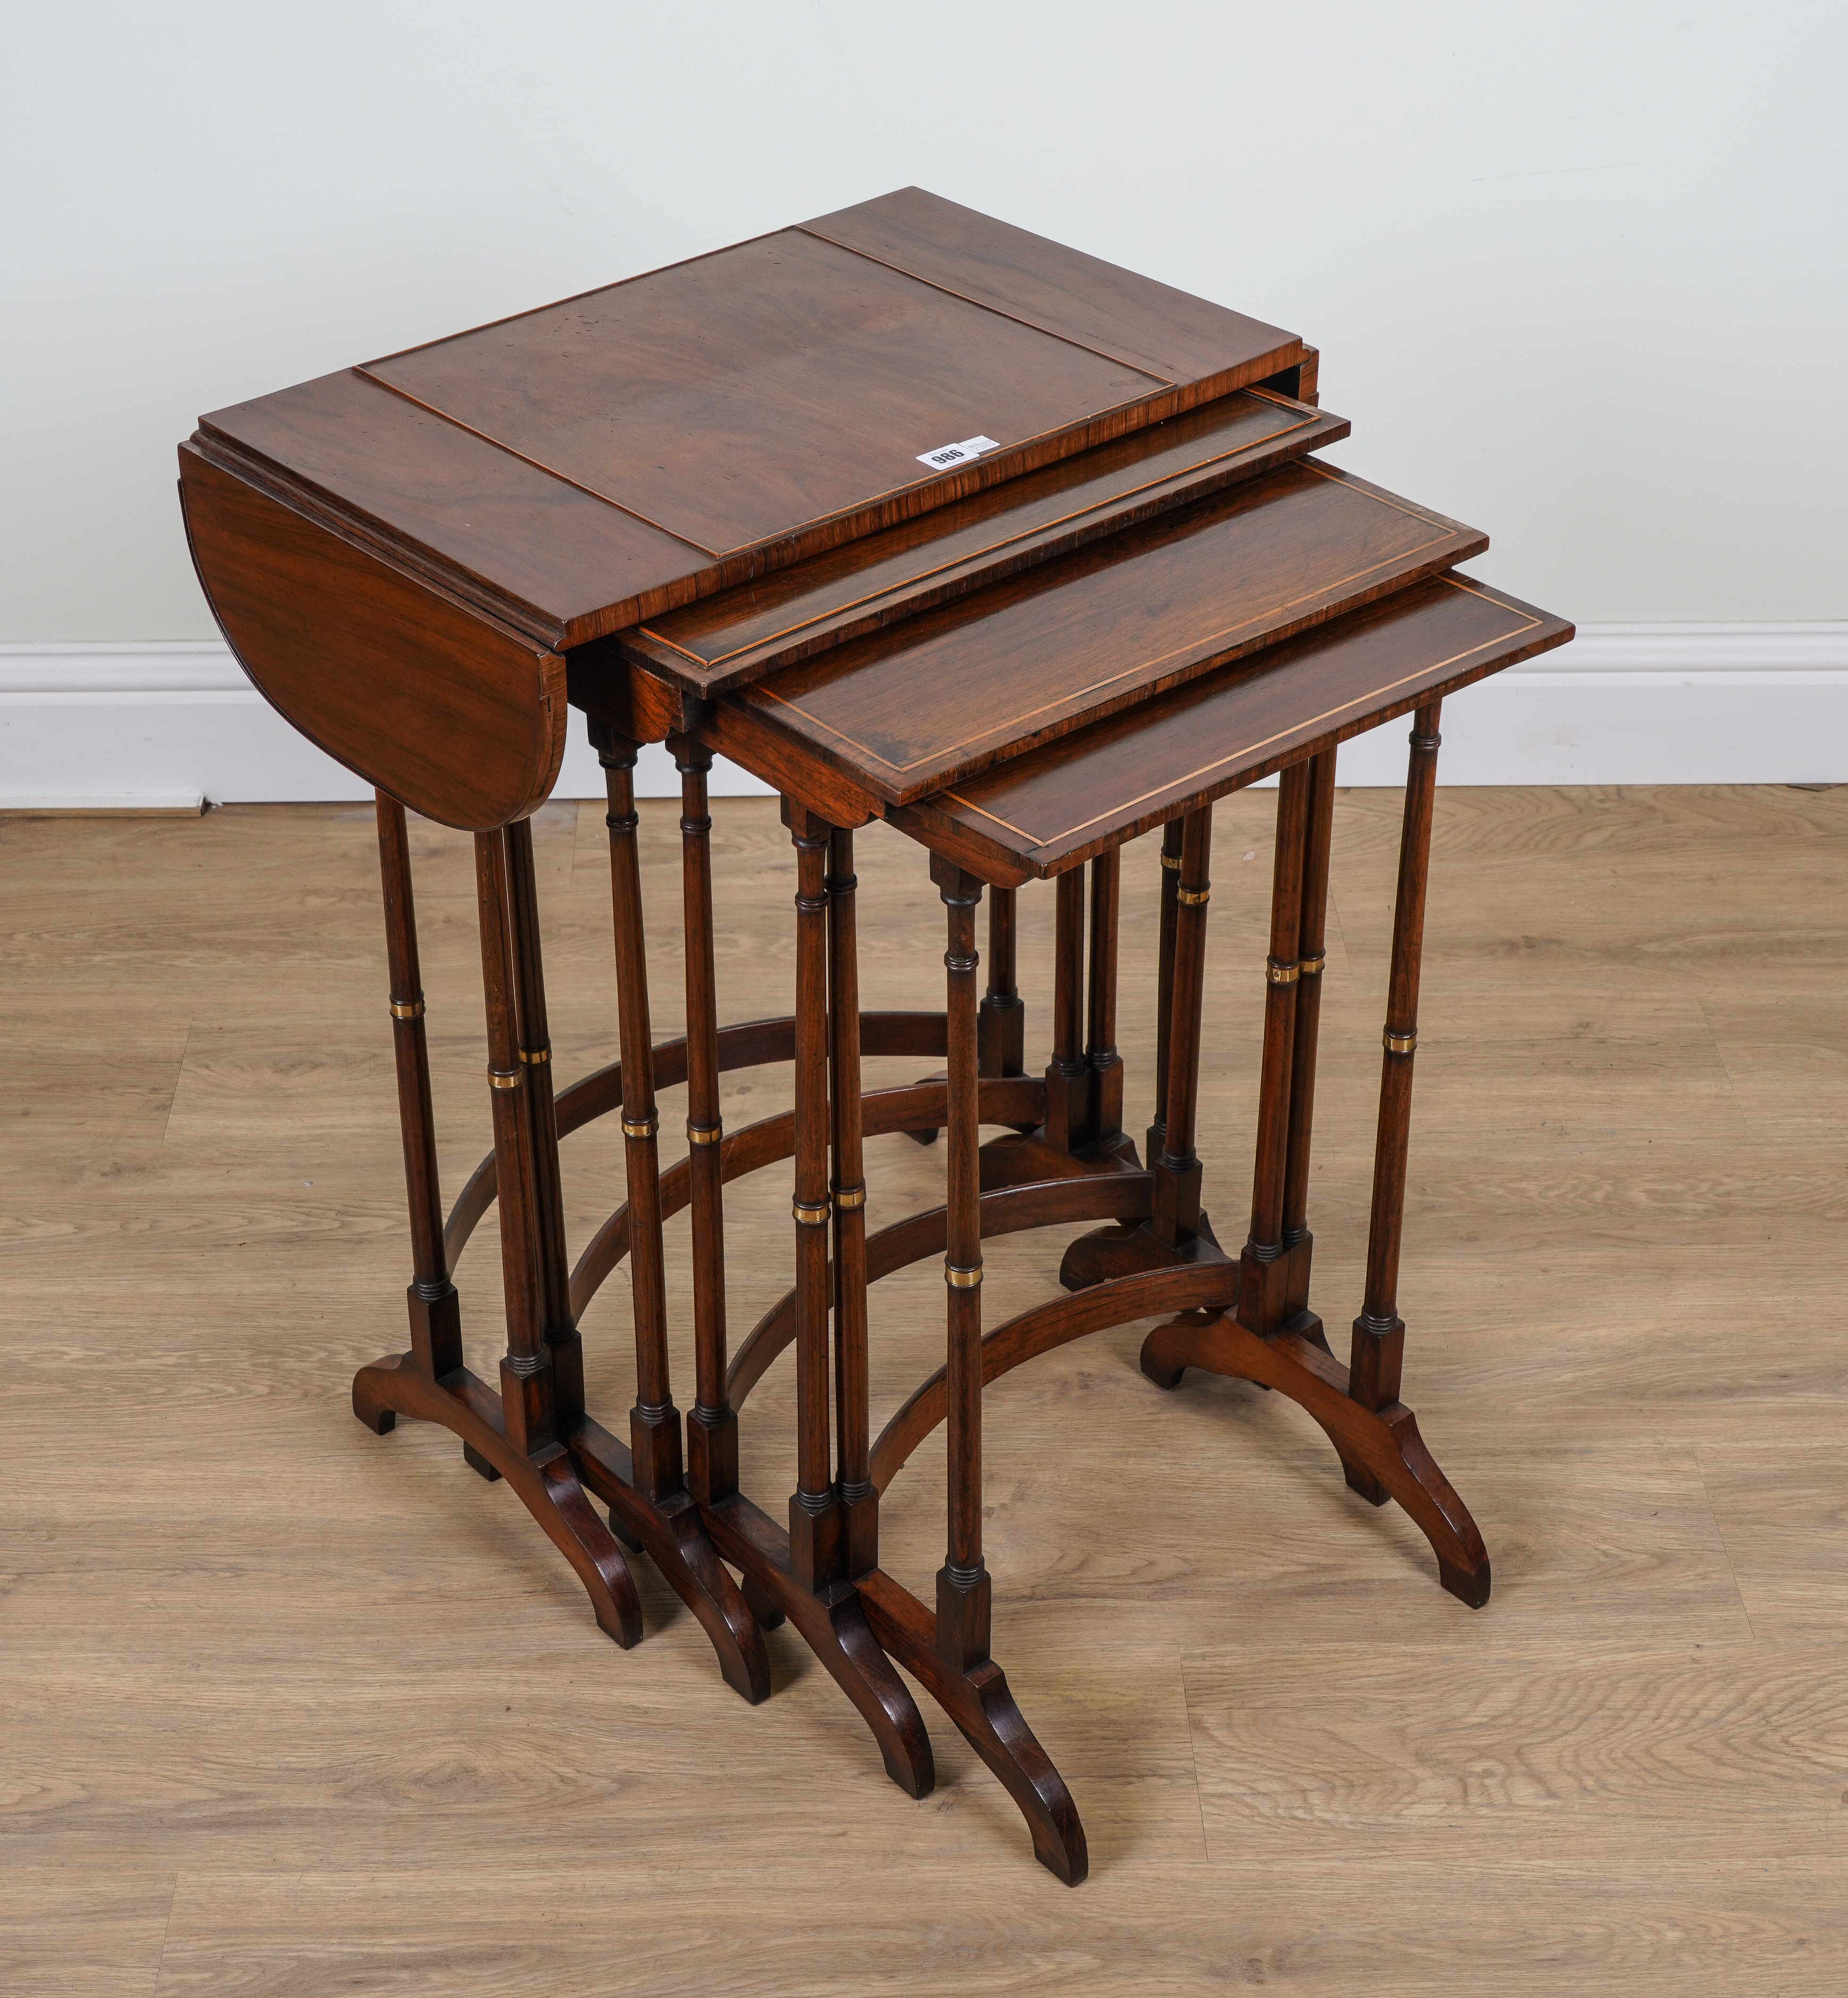 A NEST OF FOUR MID-19TH CENTURY GILT-METAL MOUNTED ROSEWOOD OCCASIONAL TABLES (4) - Image 2 of 3